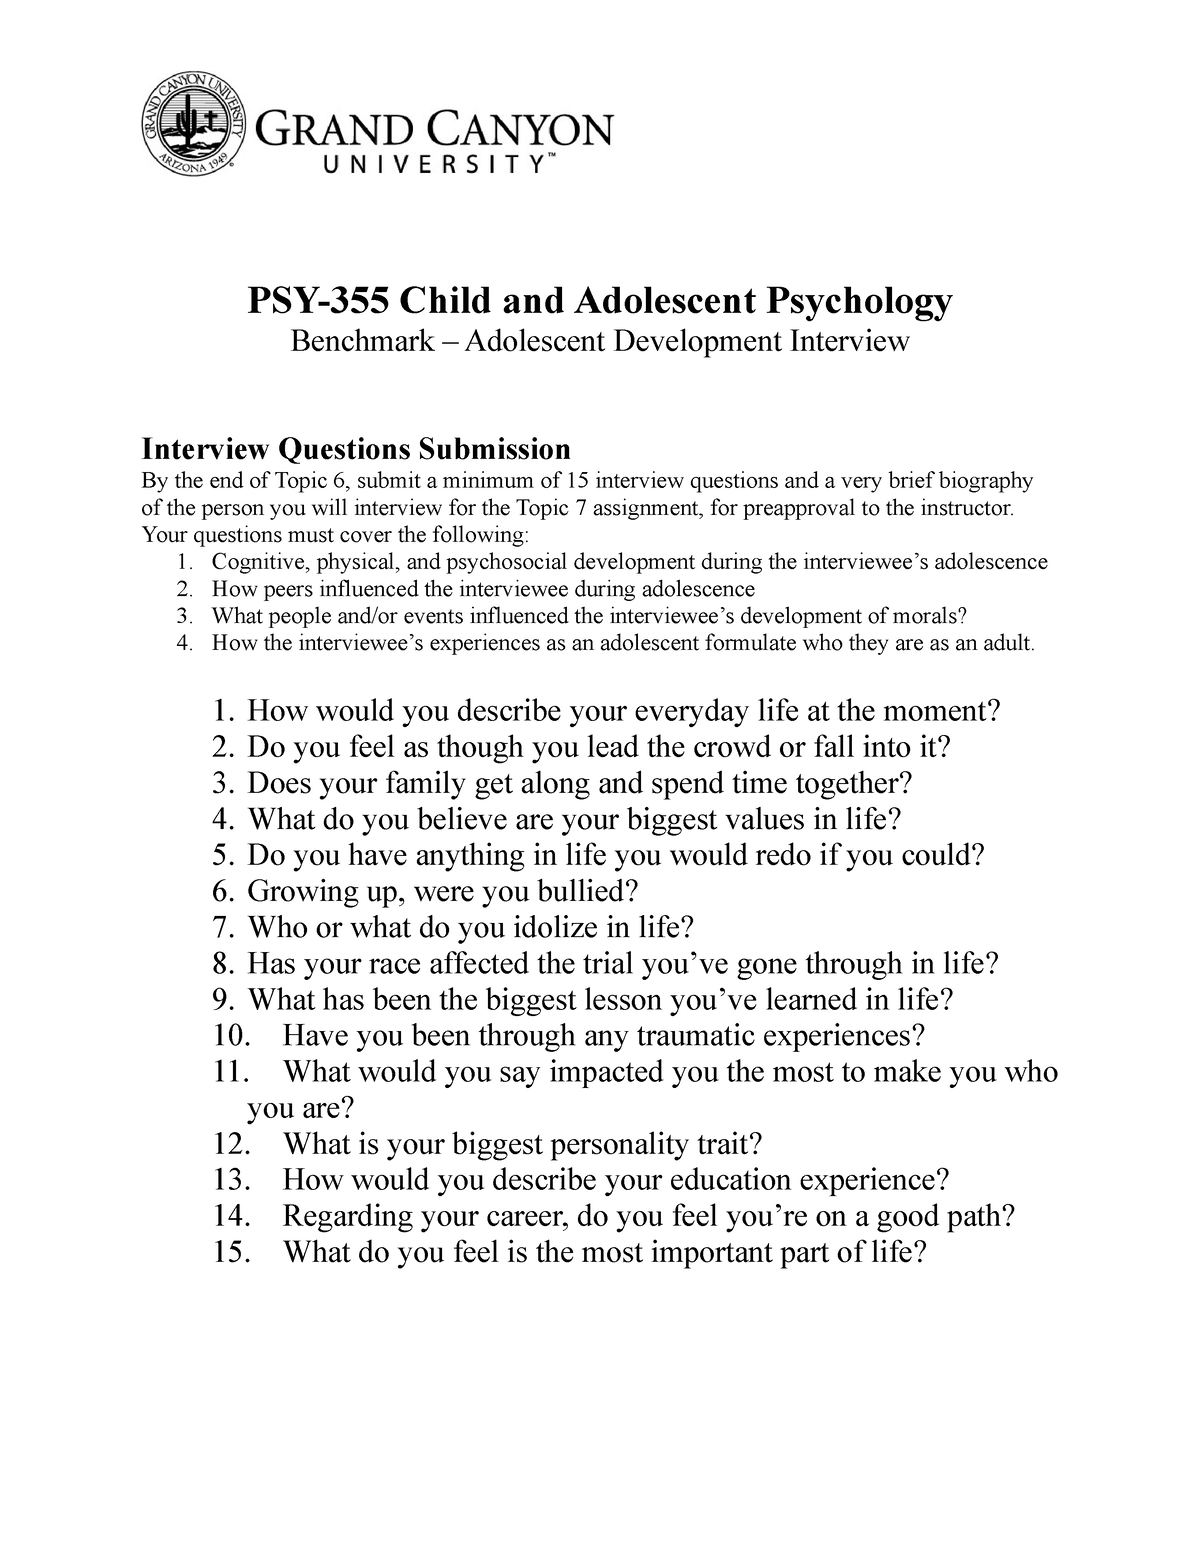 research and child development paper psy 355